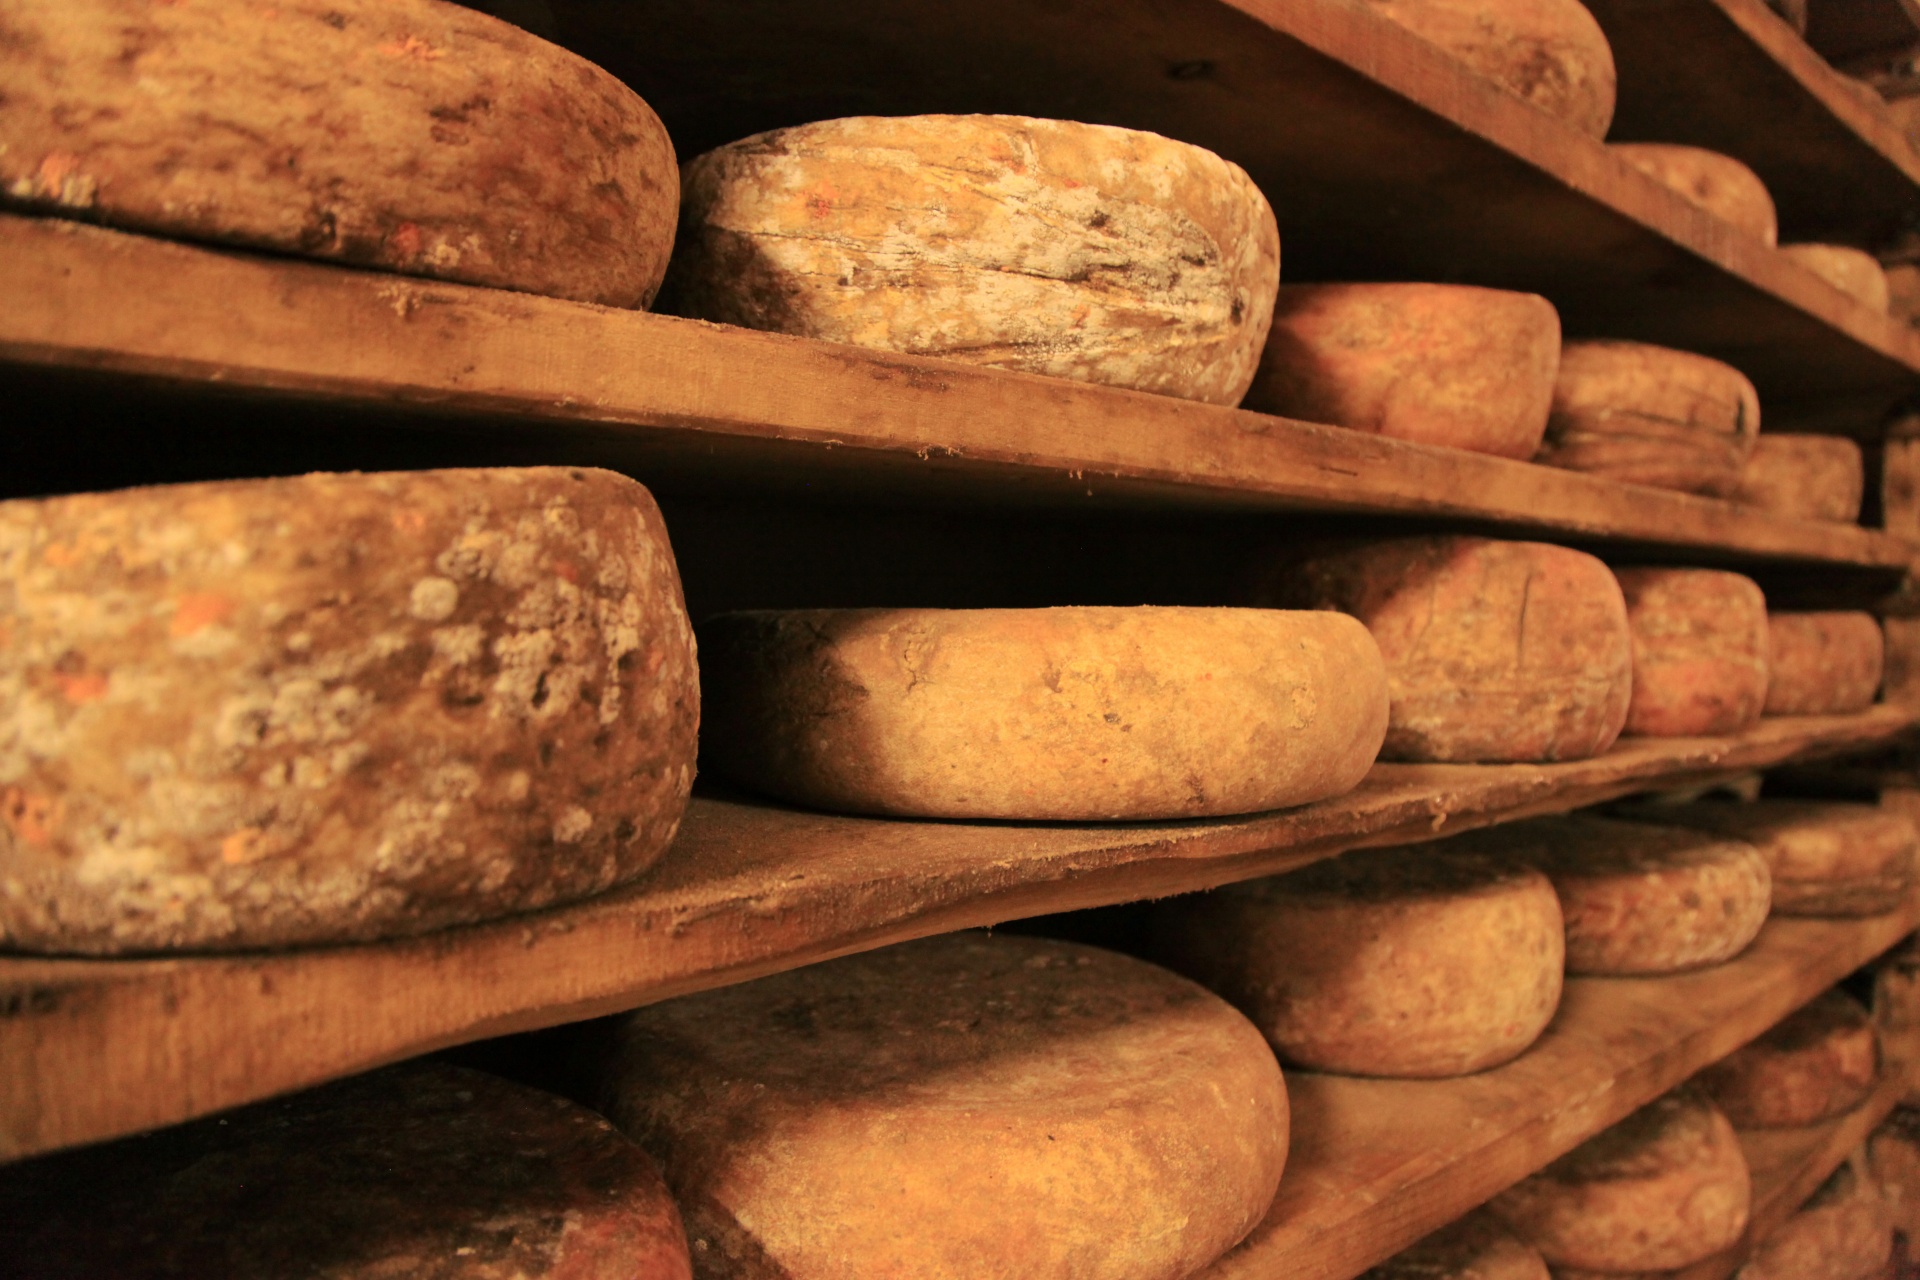 Cheese ripening on shelves